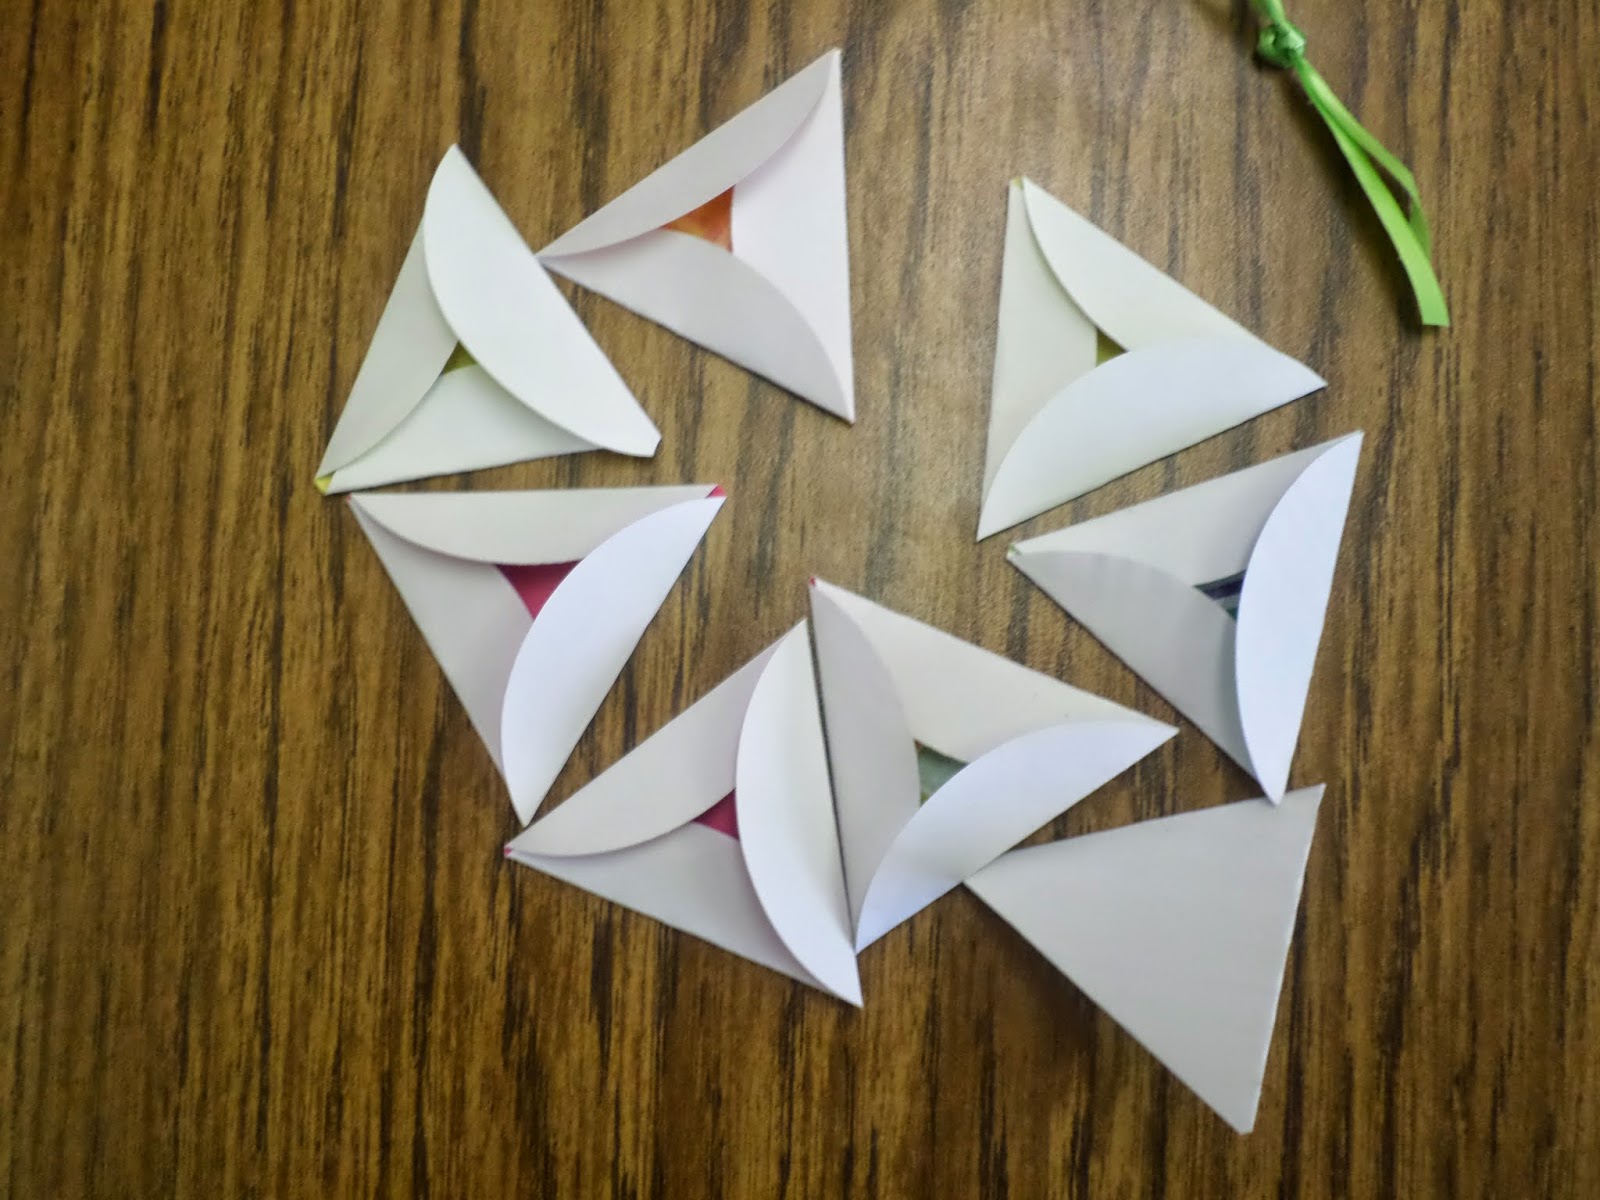 circles folded into equilateral triangles. 